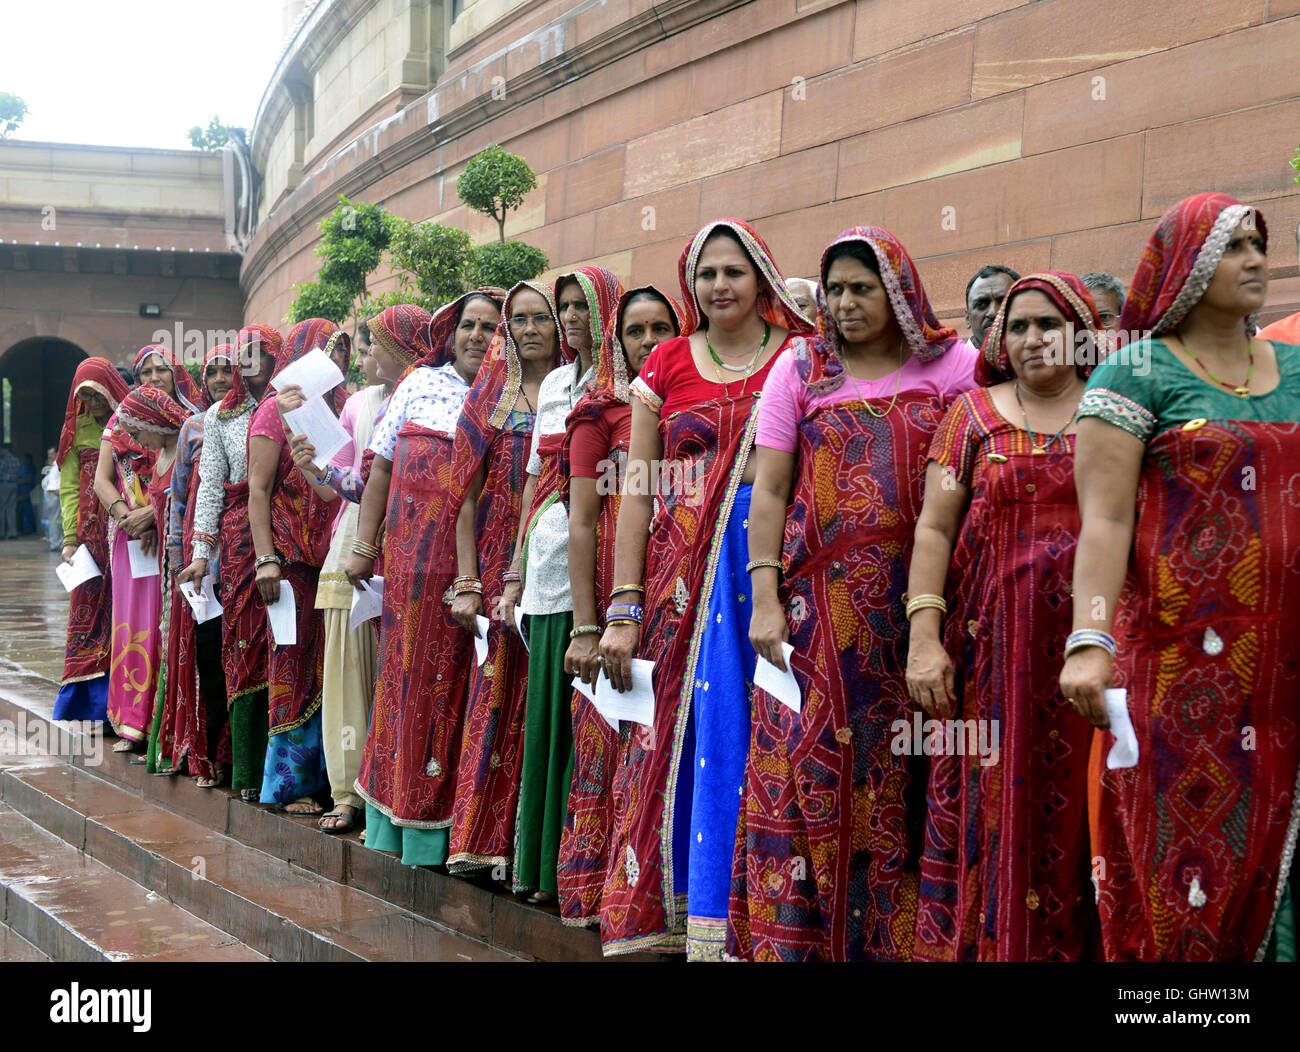 New Delhi, India. 11th Aug, 2016. Women dressed with traditional attire from Jhunjhunu district of Rajasthan wait in line to spectate the monsoon session in Indian parliament house in New Delhi, India, on Aug. 11, 2016. Credit:  Stringer/Xinhua/Alamy Live News Stock Photo